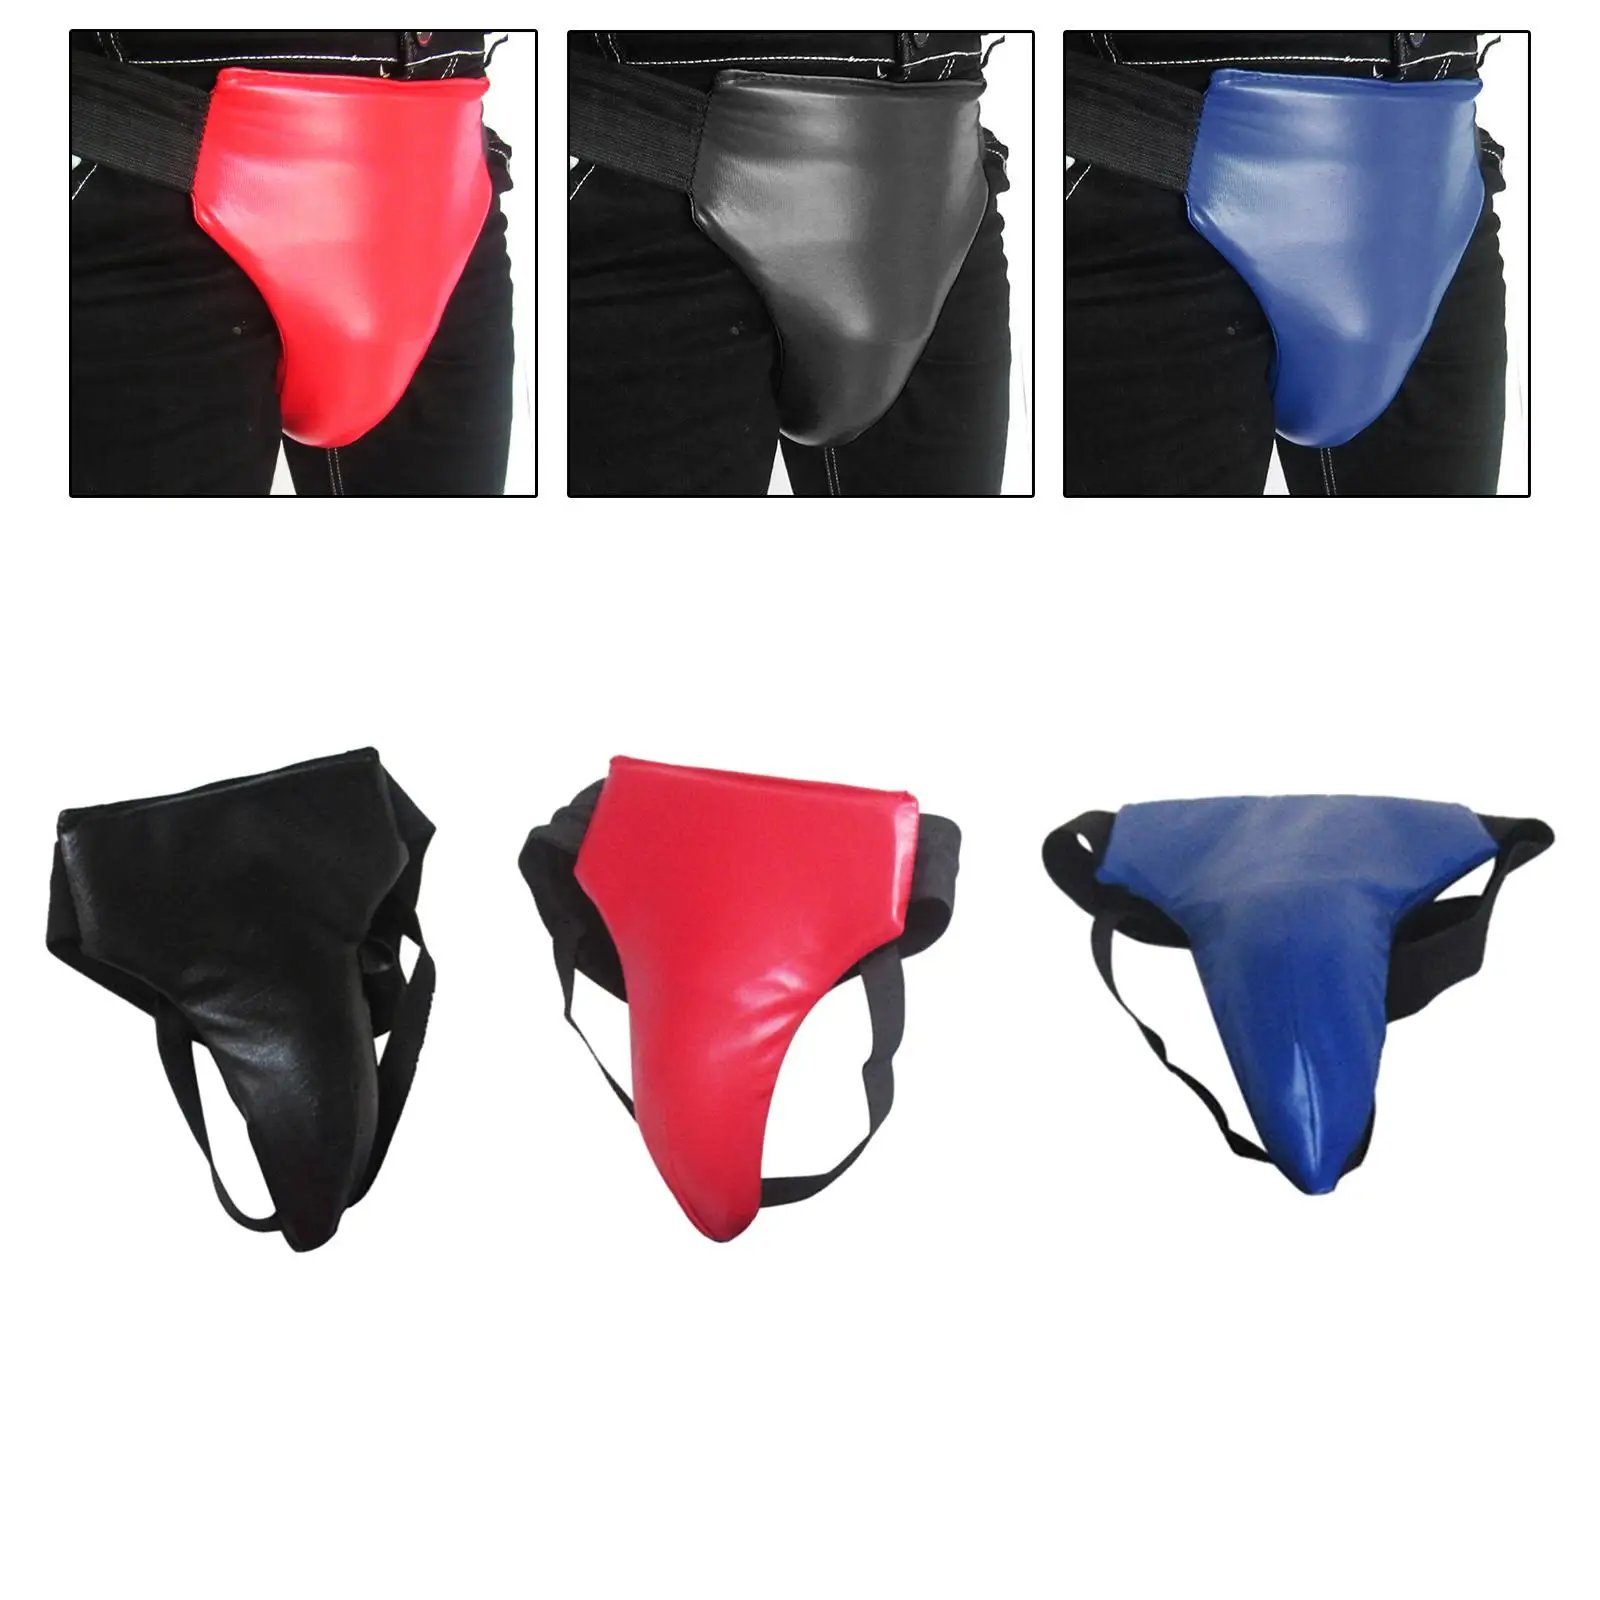 Taekwondo Groin Protector Training Exercise Safety Leather Crotch Protective for Fighting Martial Arts Sanda Kickboxing Workout